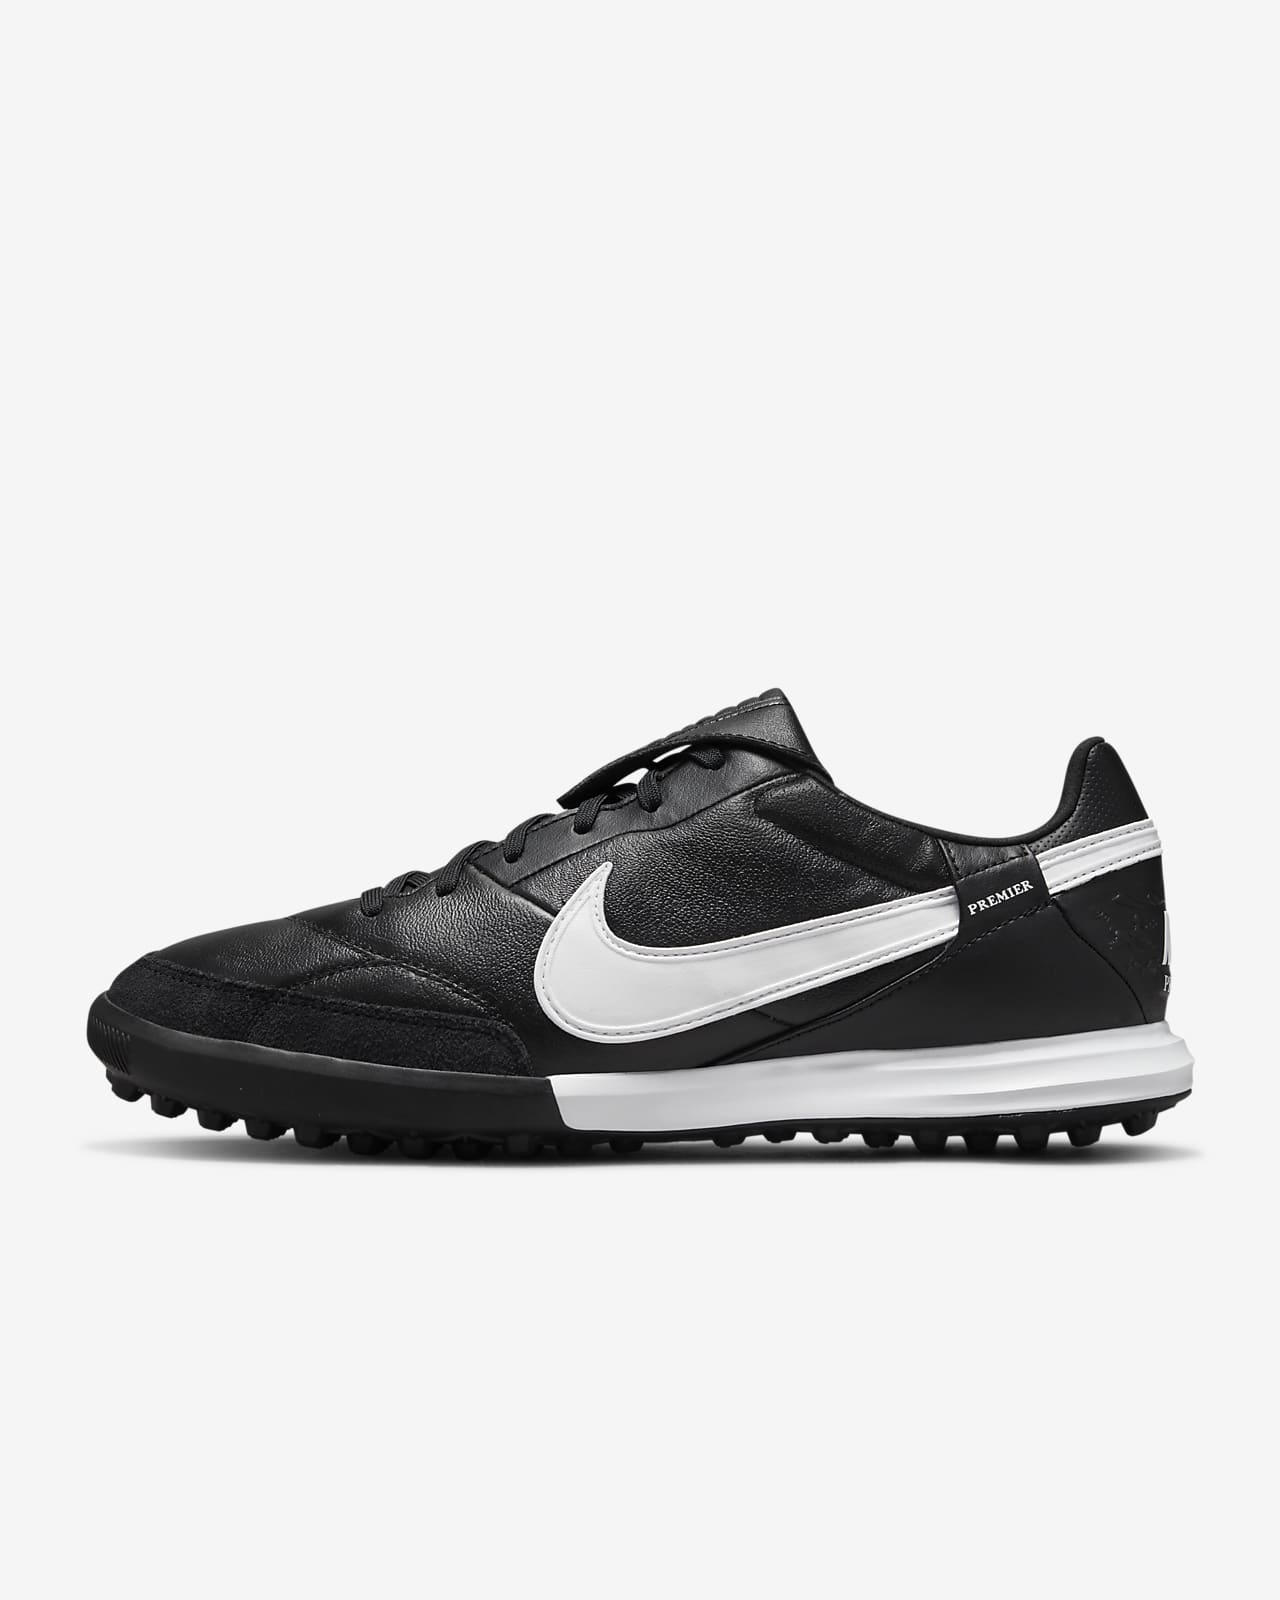 The Nike Premier 3 TF Artificial-Turf Football Shoes